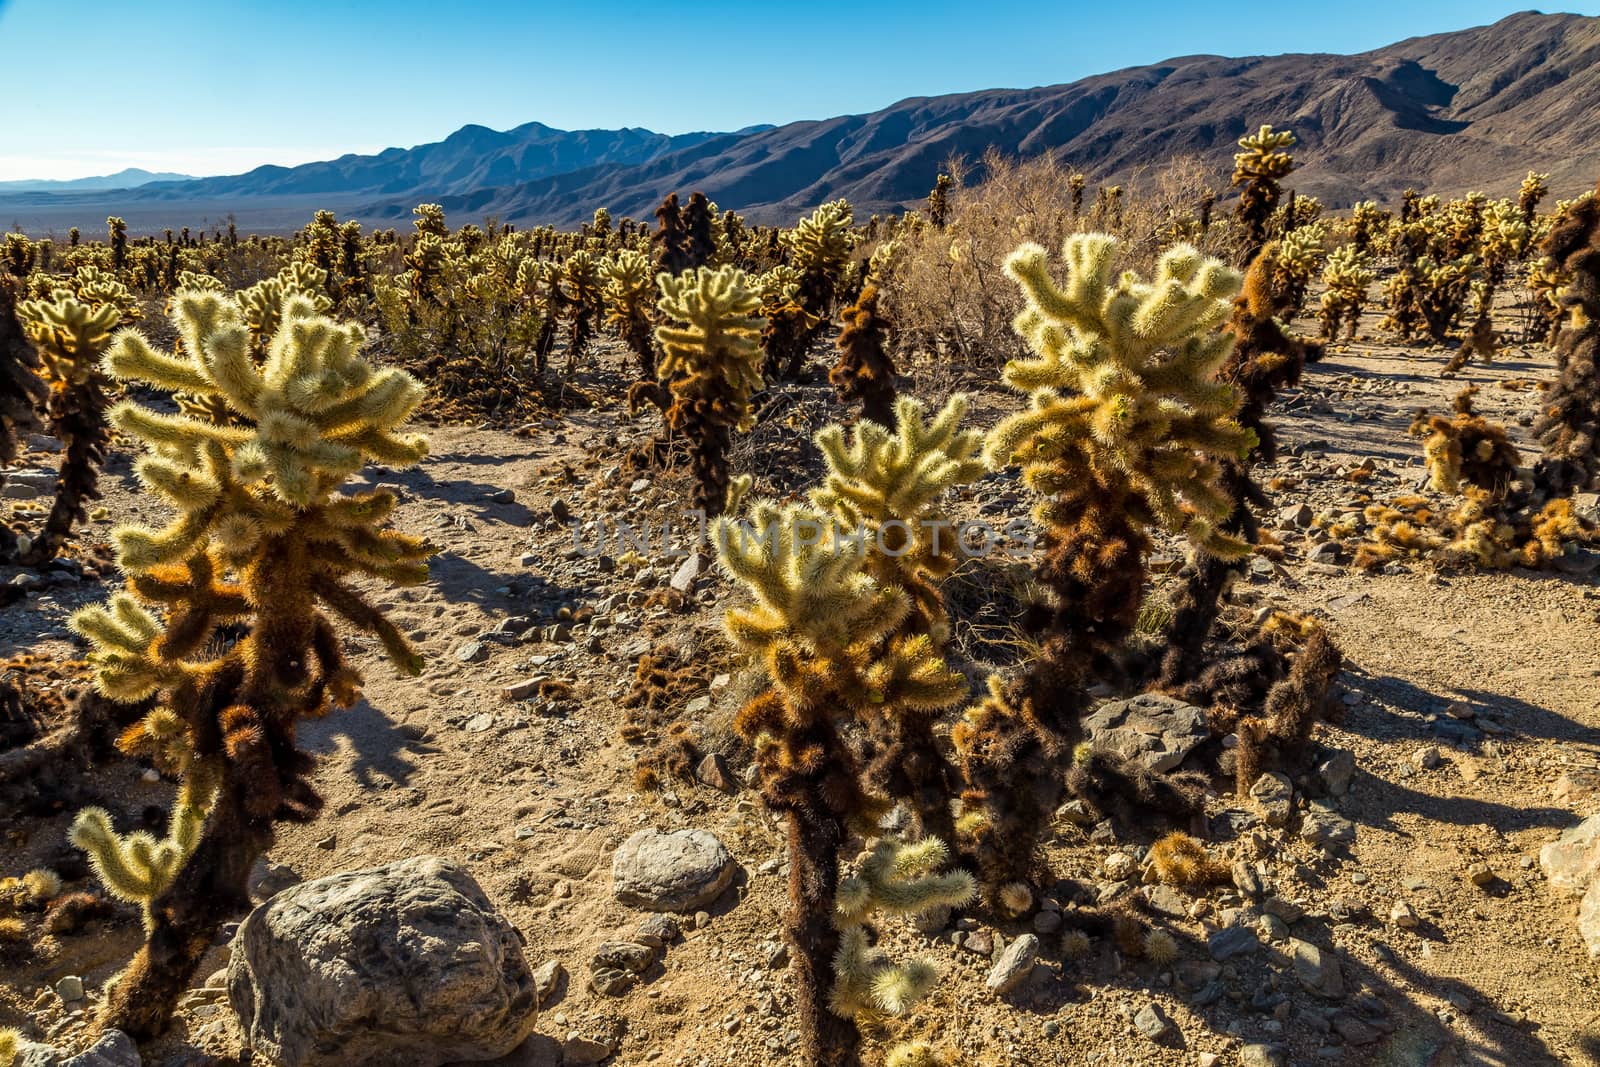 The "jumping cholla" name comes from the ease with which the stems detach when brushed. Often the merest touch will leave a person with bits of cactus hanging on their clothes to be discovered later when either sitting or leaning on them.